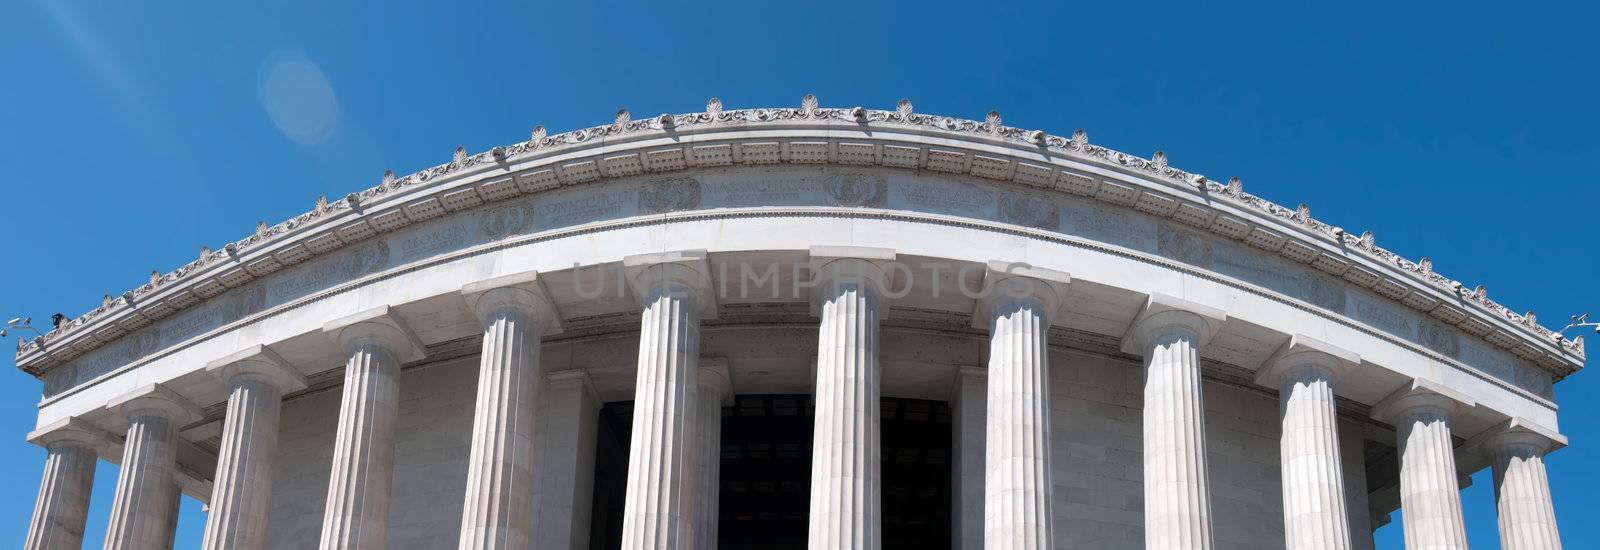 top portion of a lincoln memorial old greek architecture by digidreamgrafix